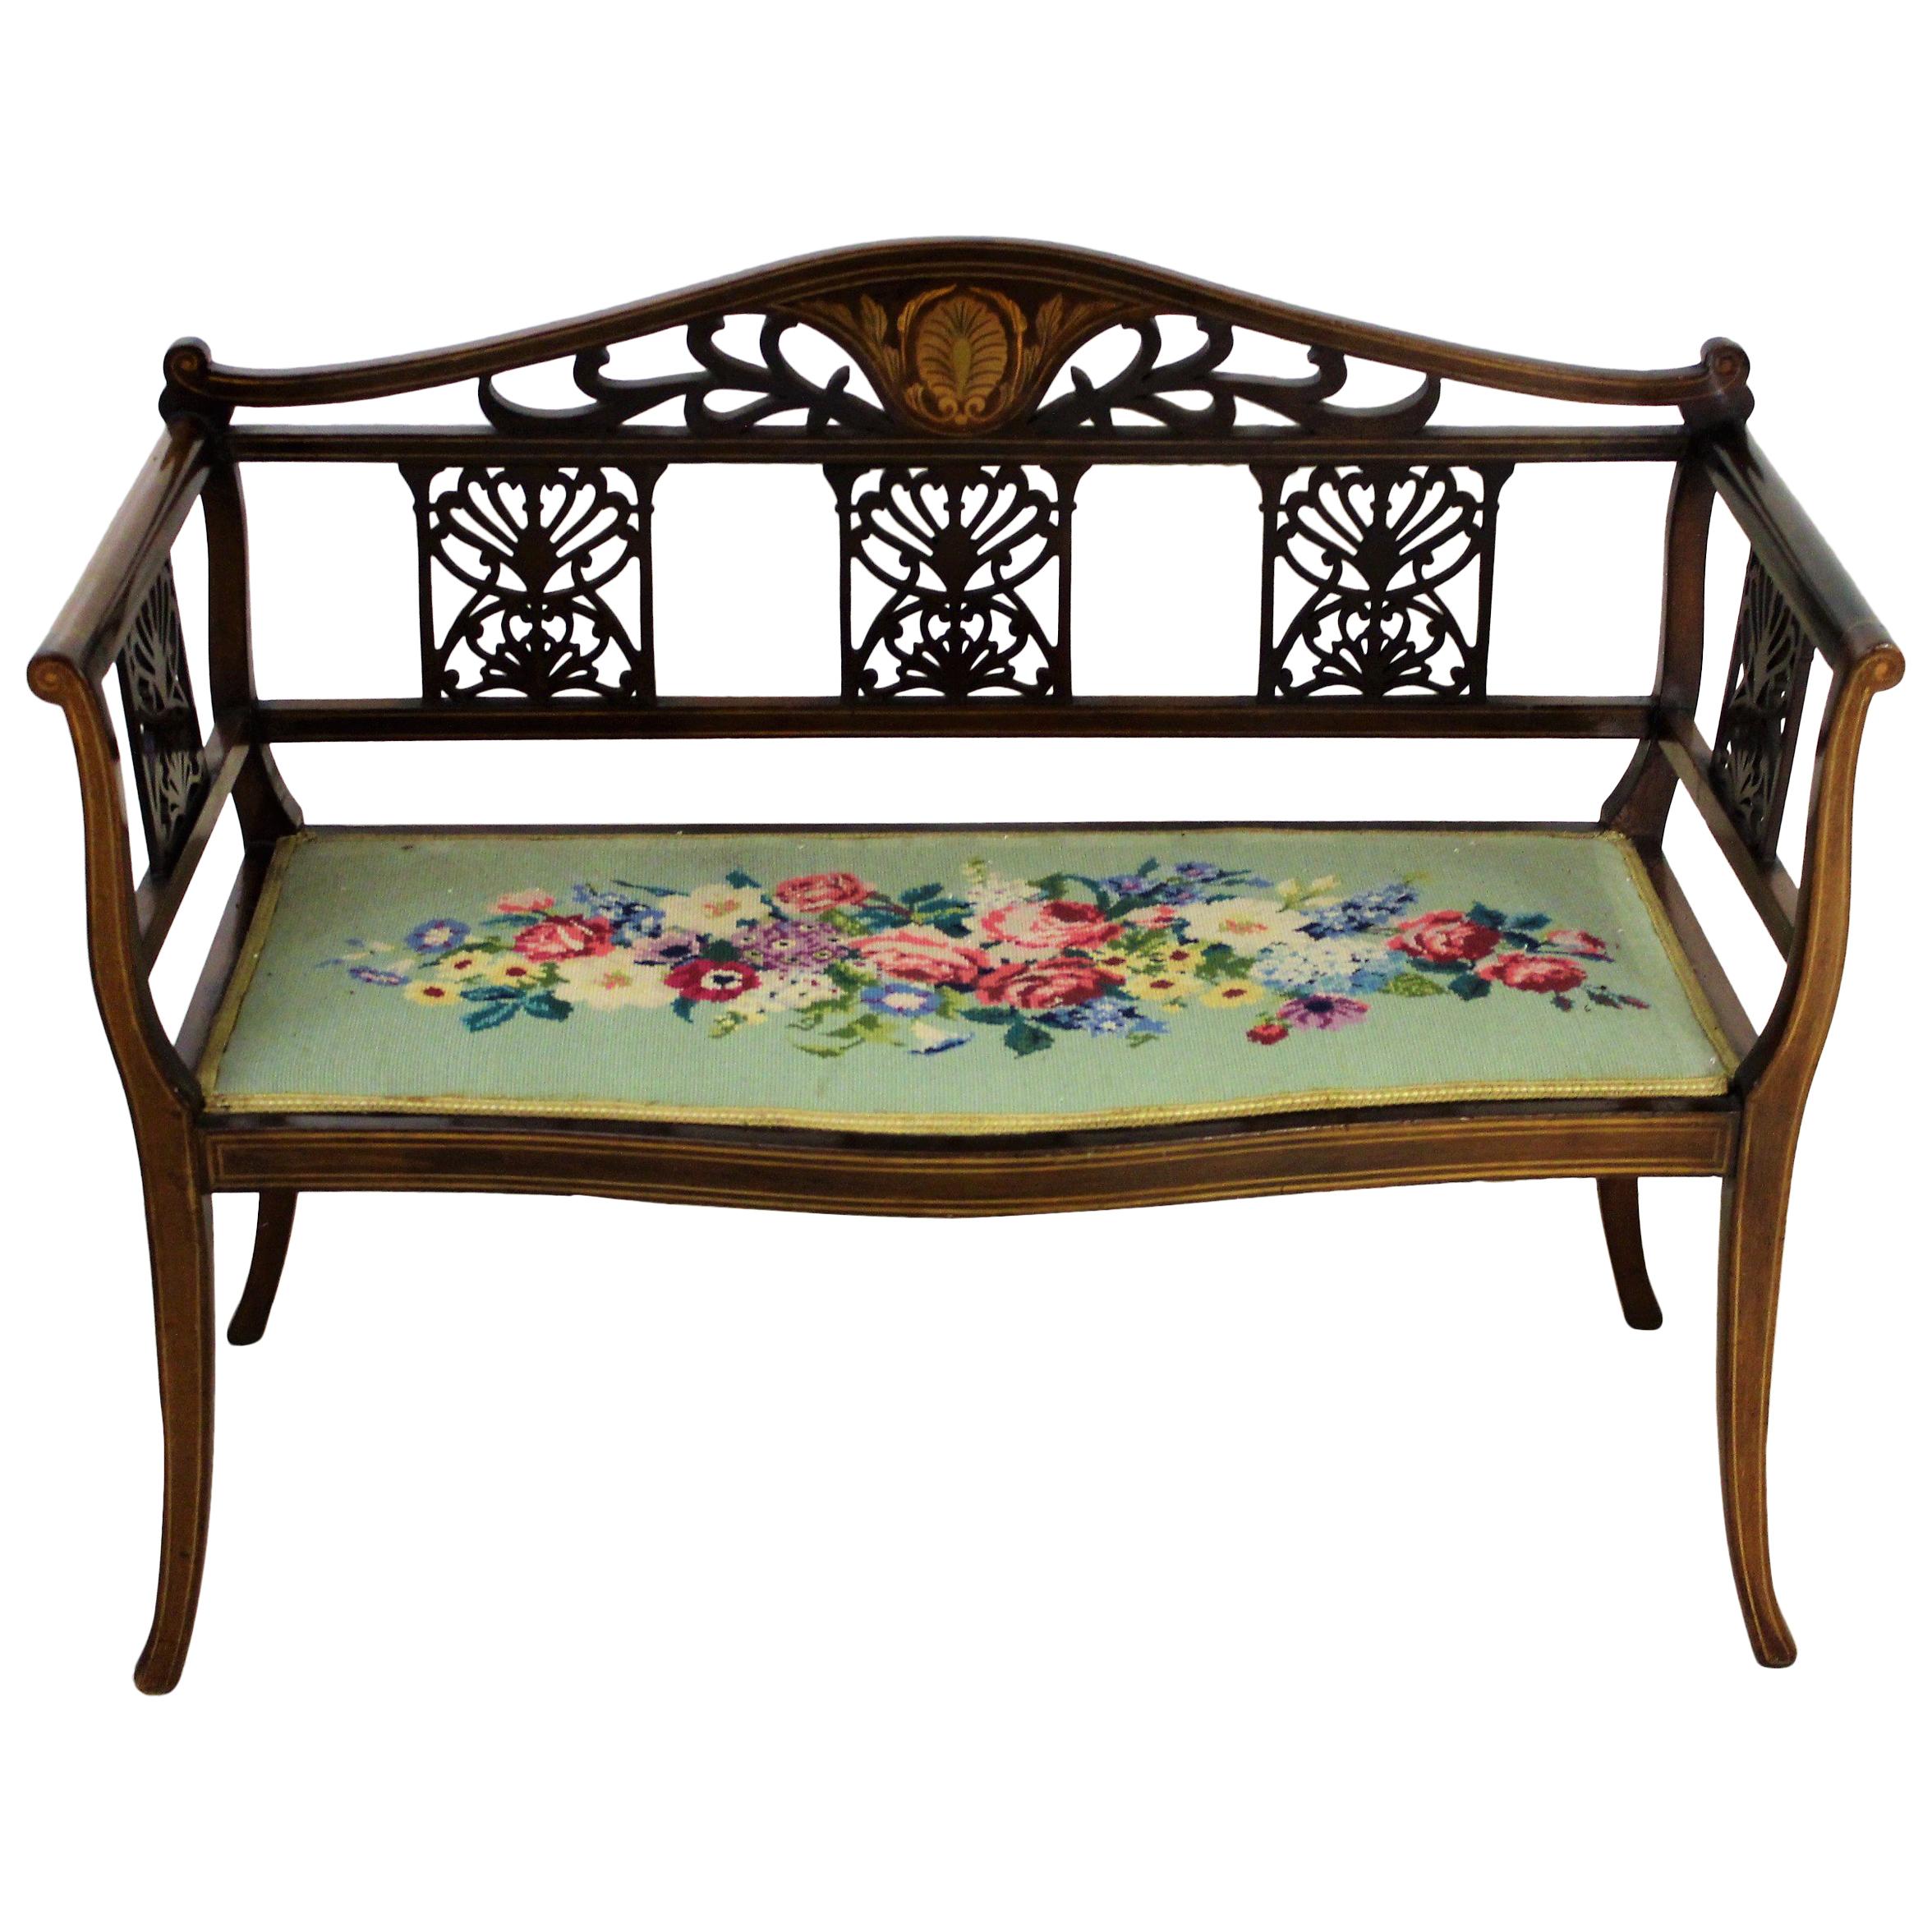 English Edwardian Period Inlaid Mahogany Settee or Bench For Sale